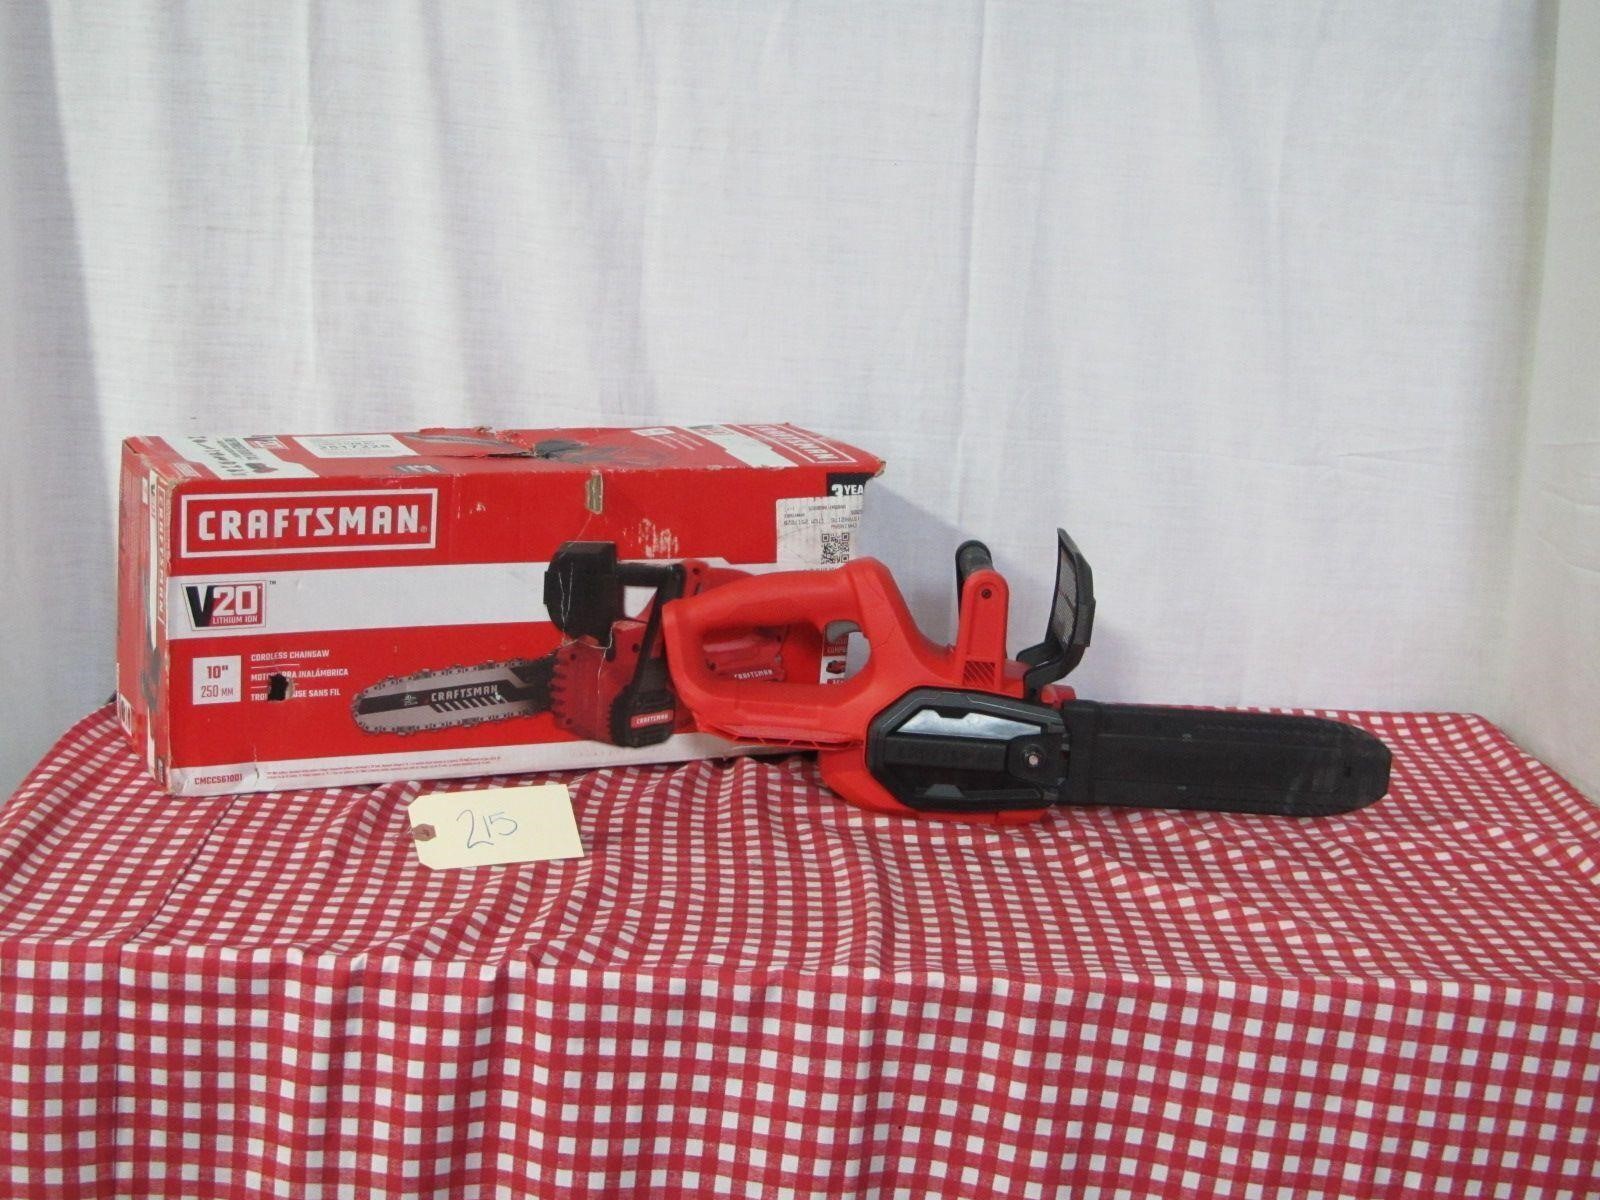 Craftsman 20V 10" Cordless Electric Chainsaw